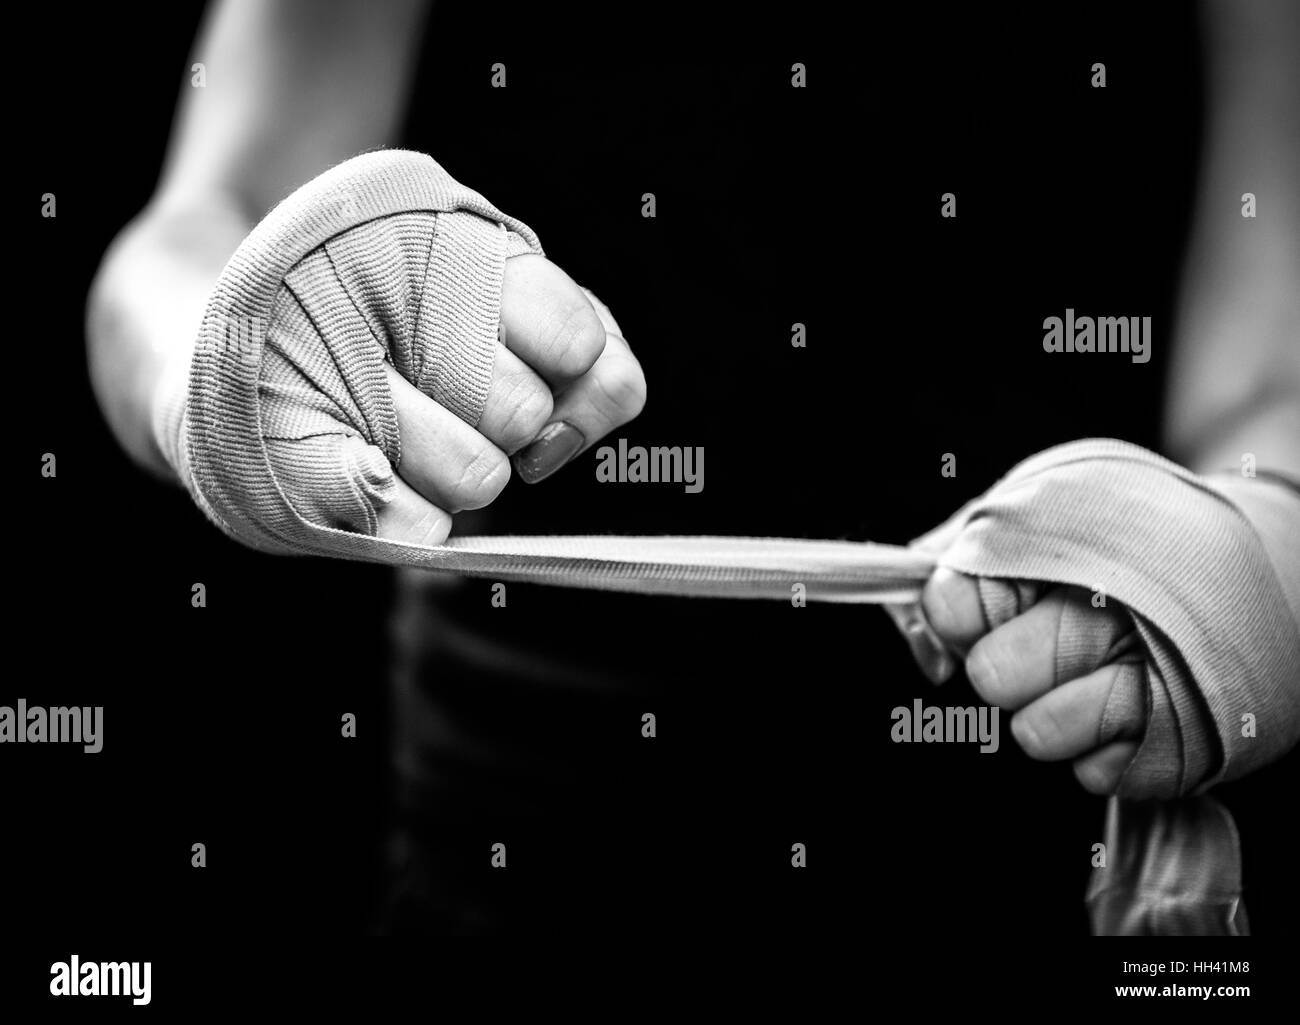 Woman is wrapping hands with pink boxing wraps. Isolated on black with red nails. Strong hand and fist, ready for fight and active exercise Stock Photo